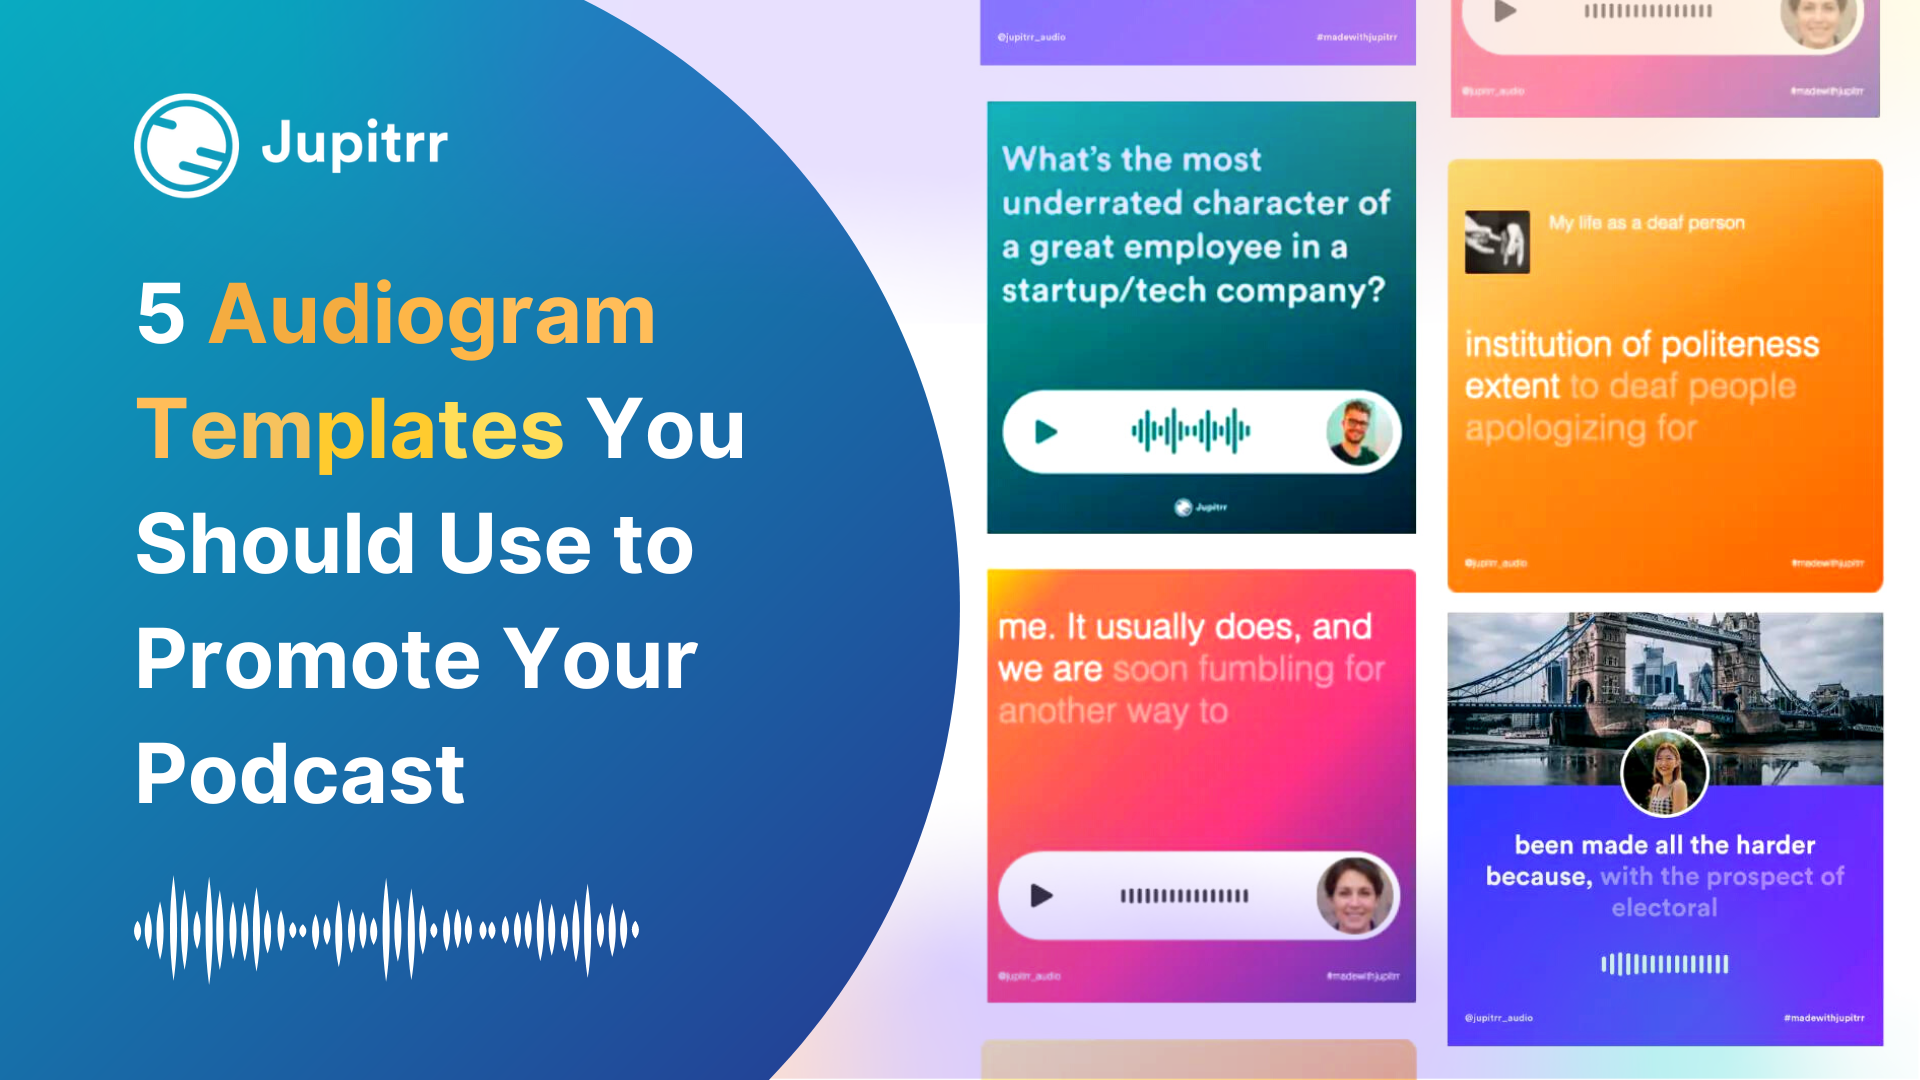 5 Audiogram Templates You Should Use to Promote Your Podcast